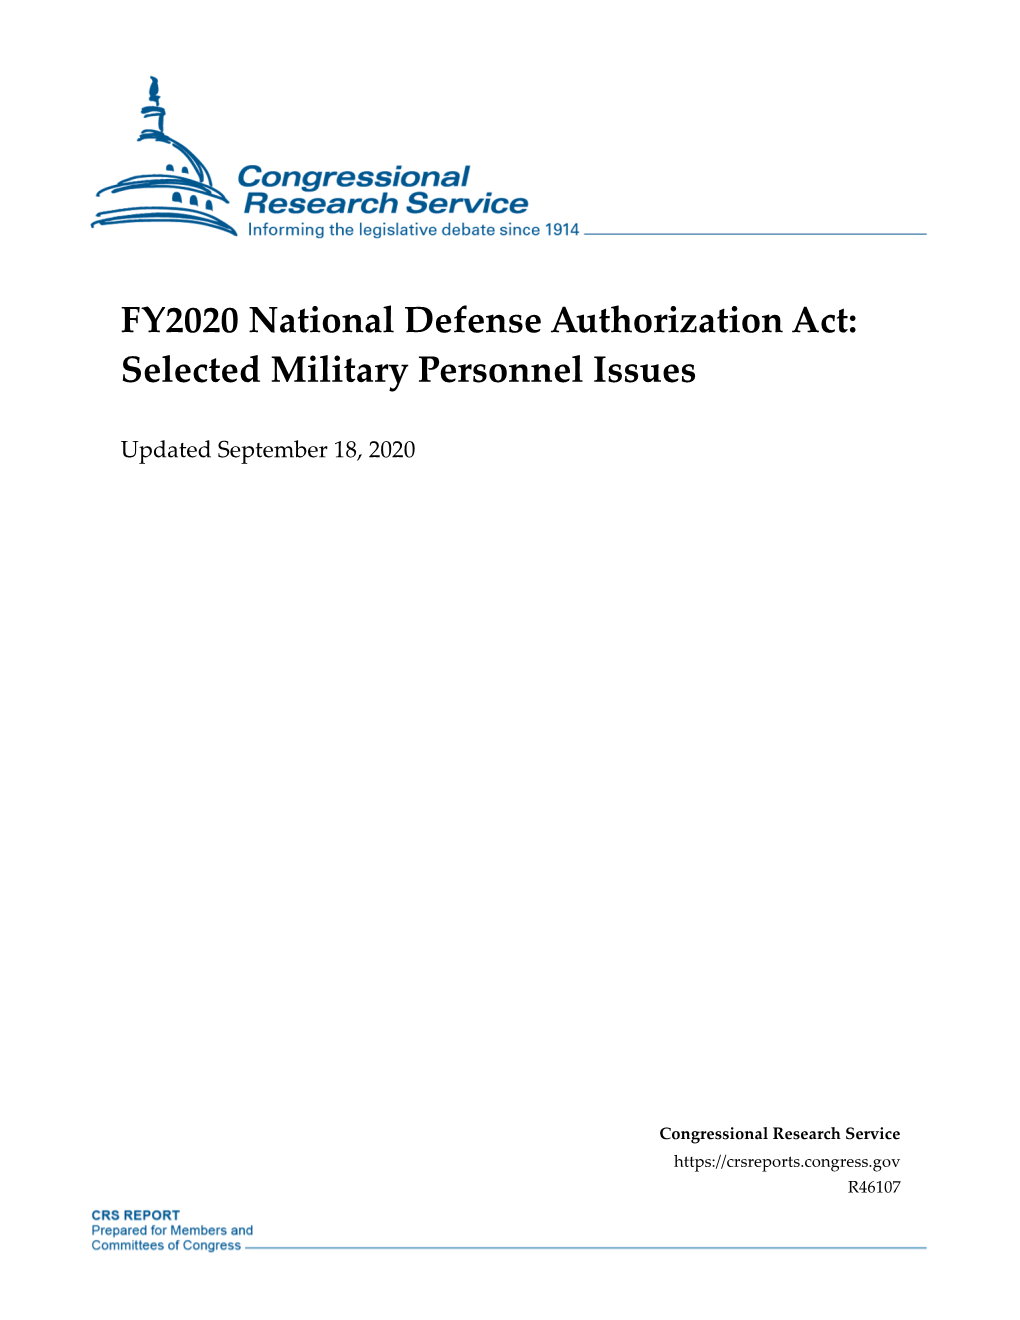 FY2020 National Defense Authorization Act: Selected Military Personnel Issues